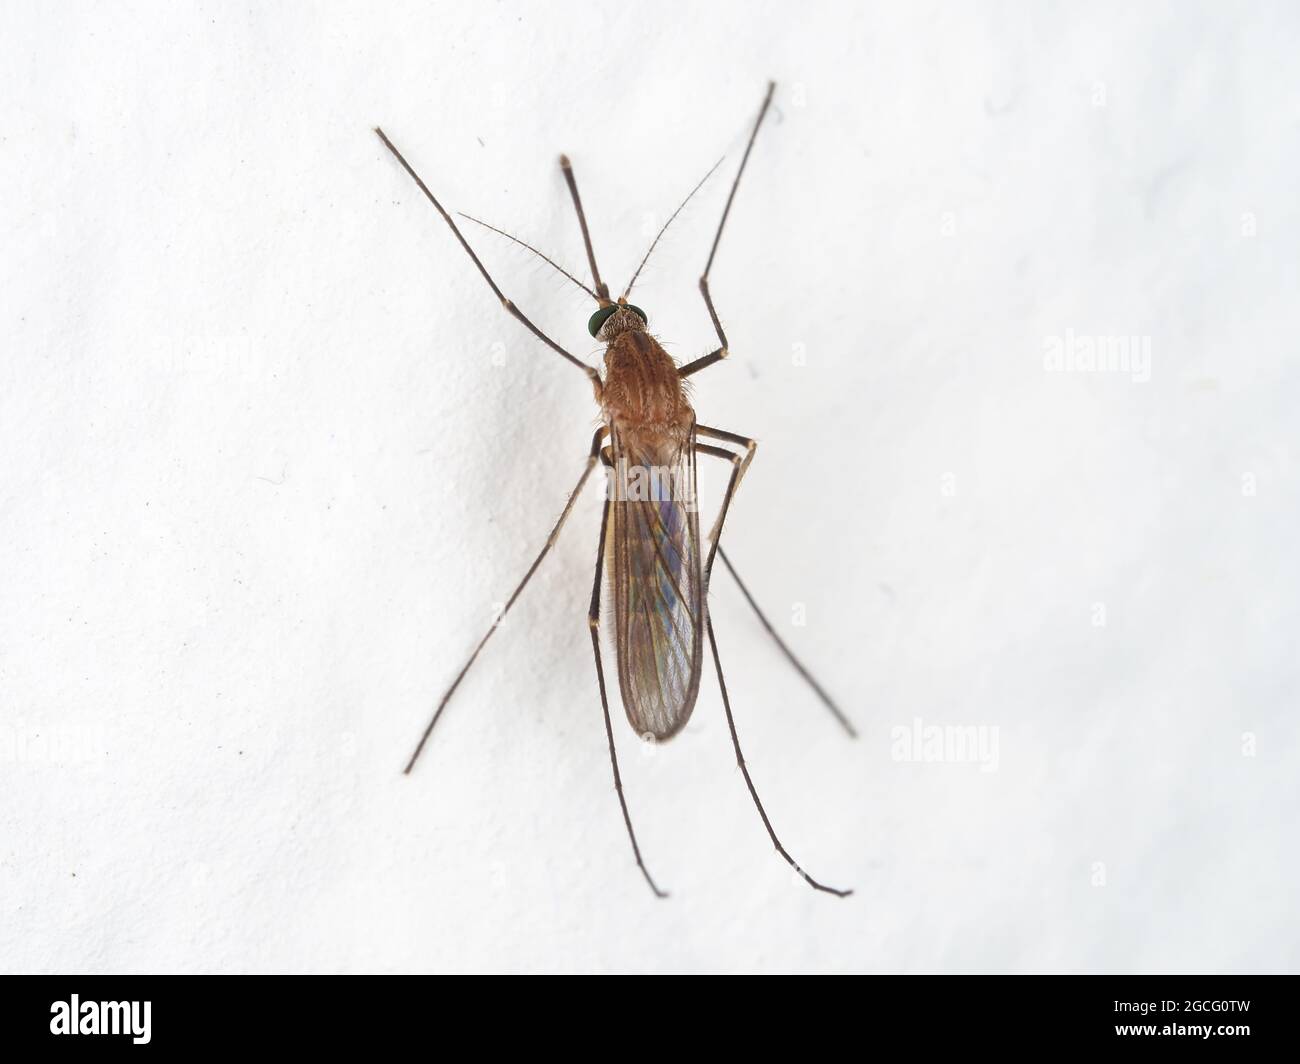 Mosquito on the wall in Washington state, USA - likely Culex pipiens Stock Photo